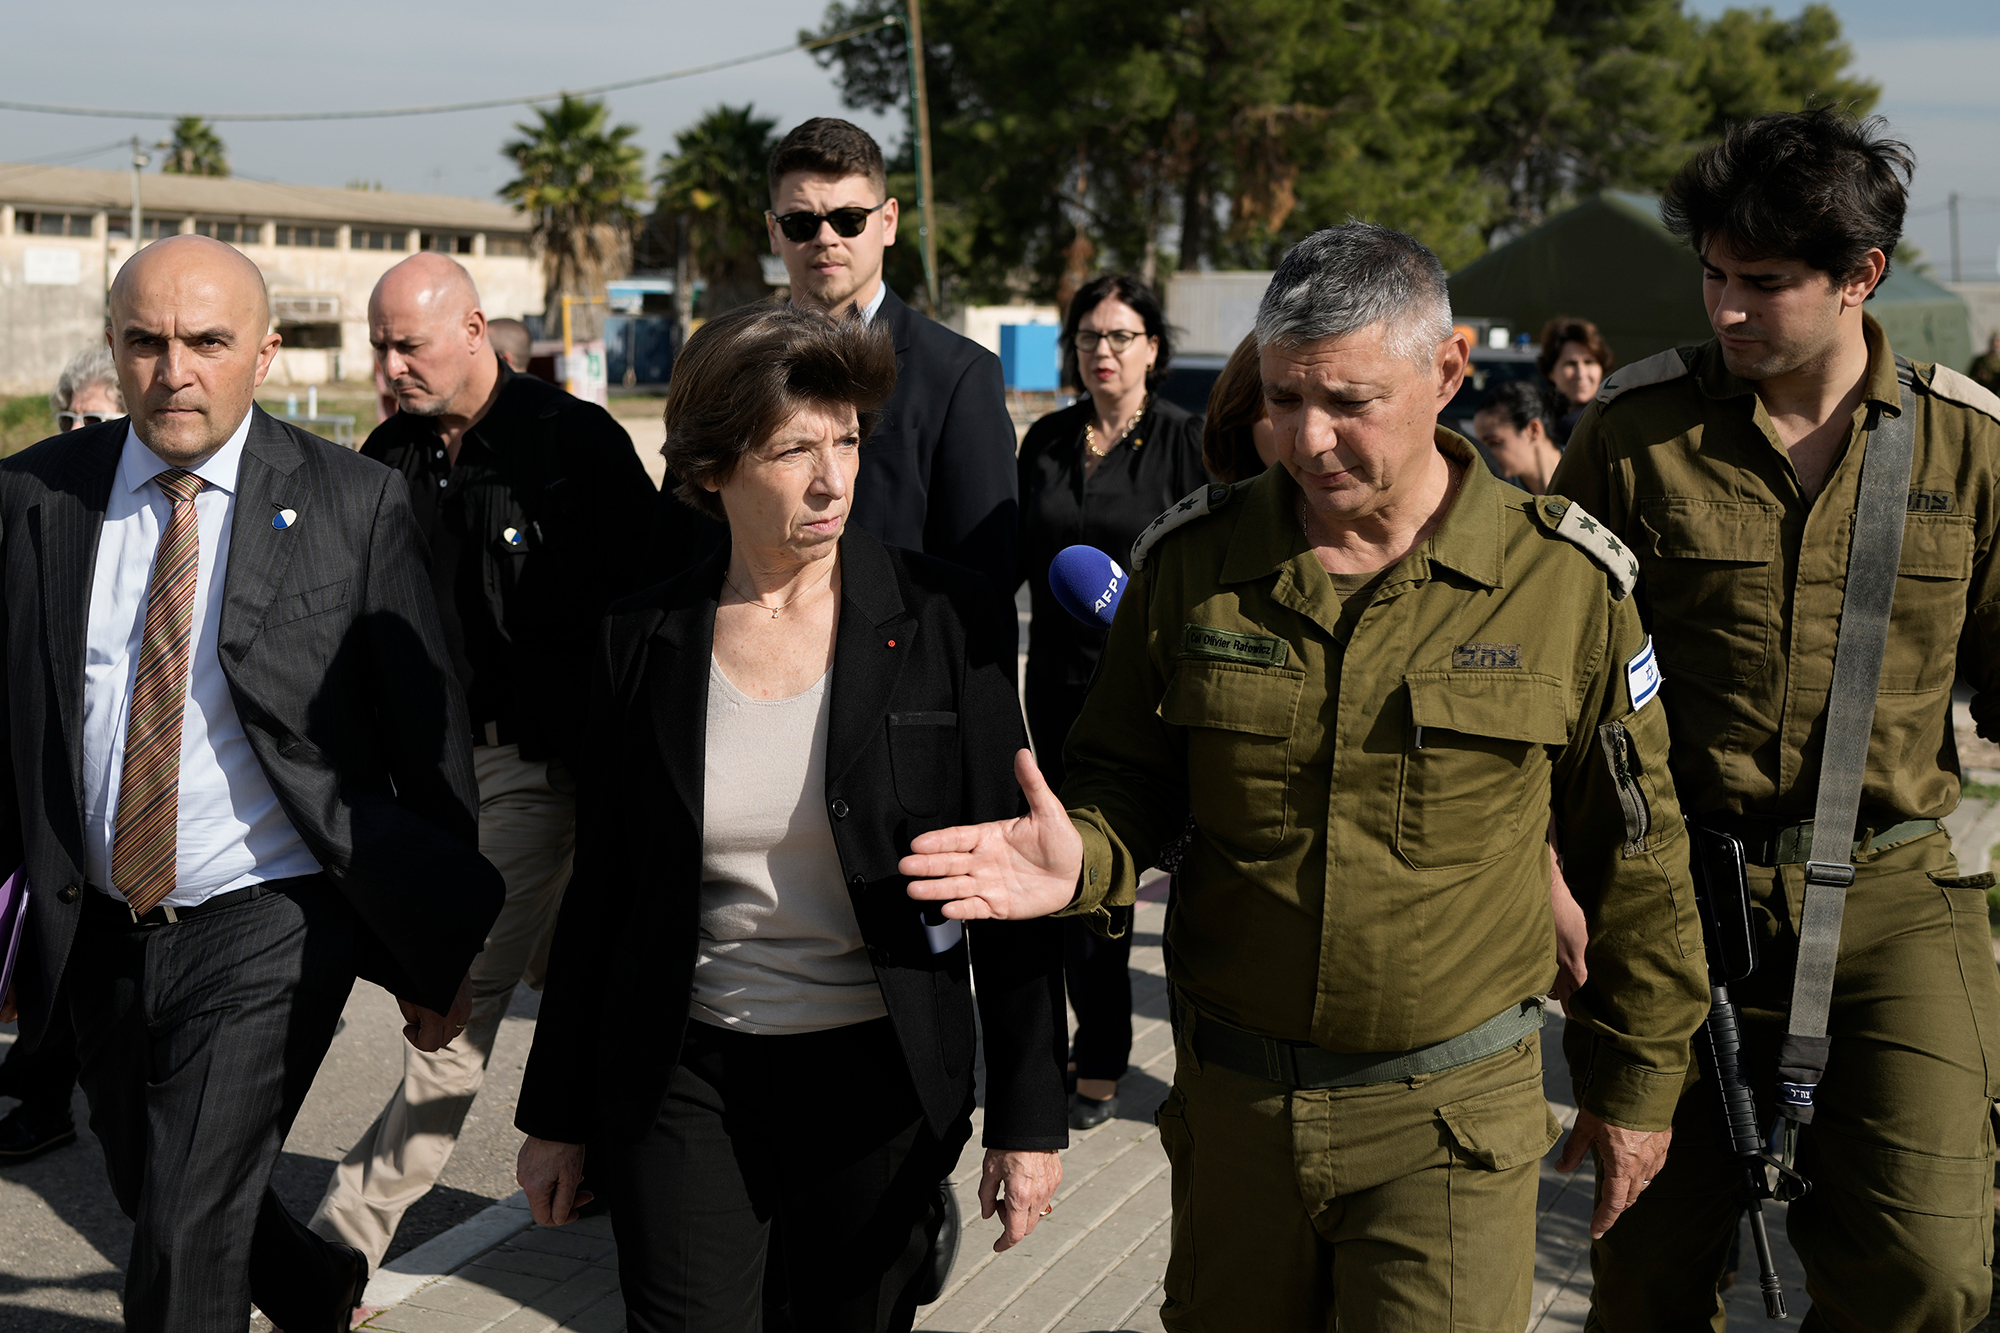 French Foreign Minister Catherine Colonna talks with Israeli Col. Olivier Rafowicz as she arrives at a military base in Israel on December 17.